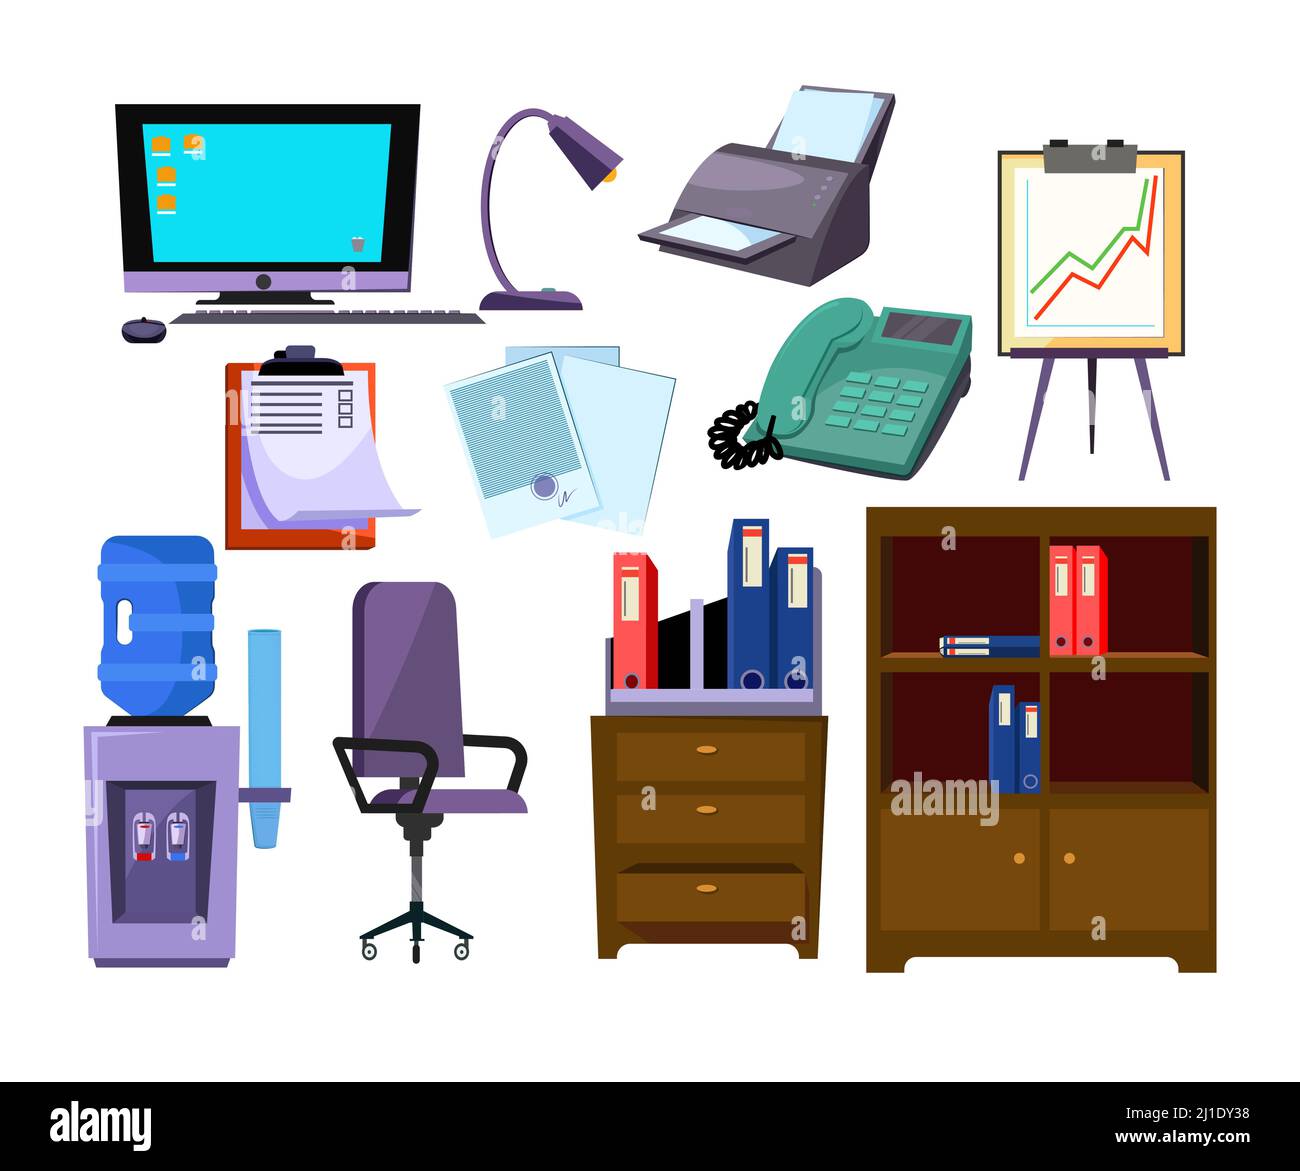 Office attributes illustration set. Computer, telephone, chair. Office concept. Can be used for topics like business, stationery, equipment Stock Vector